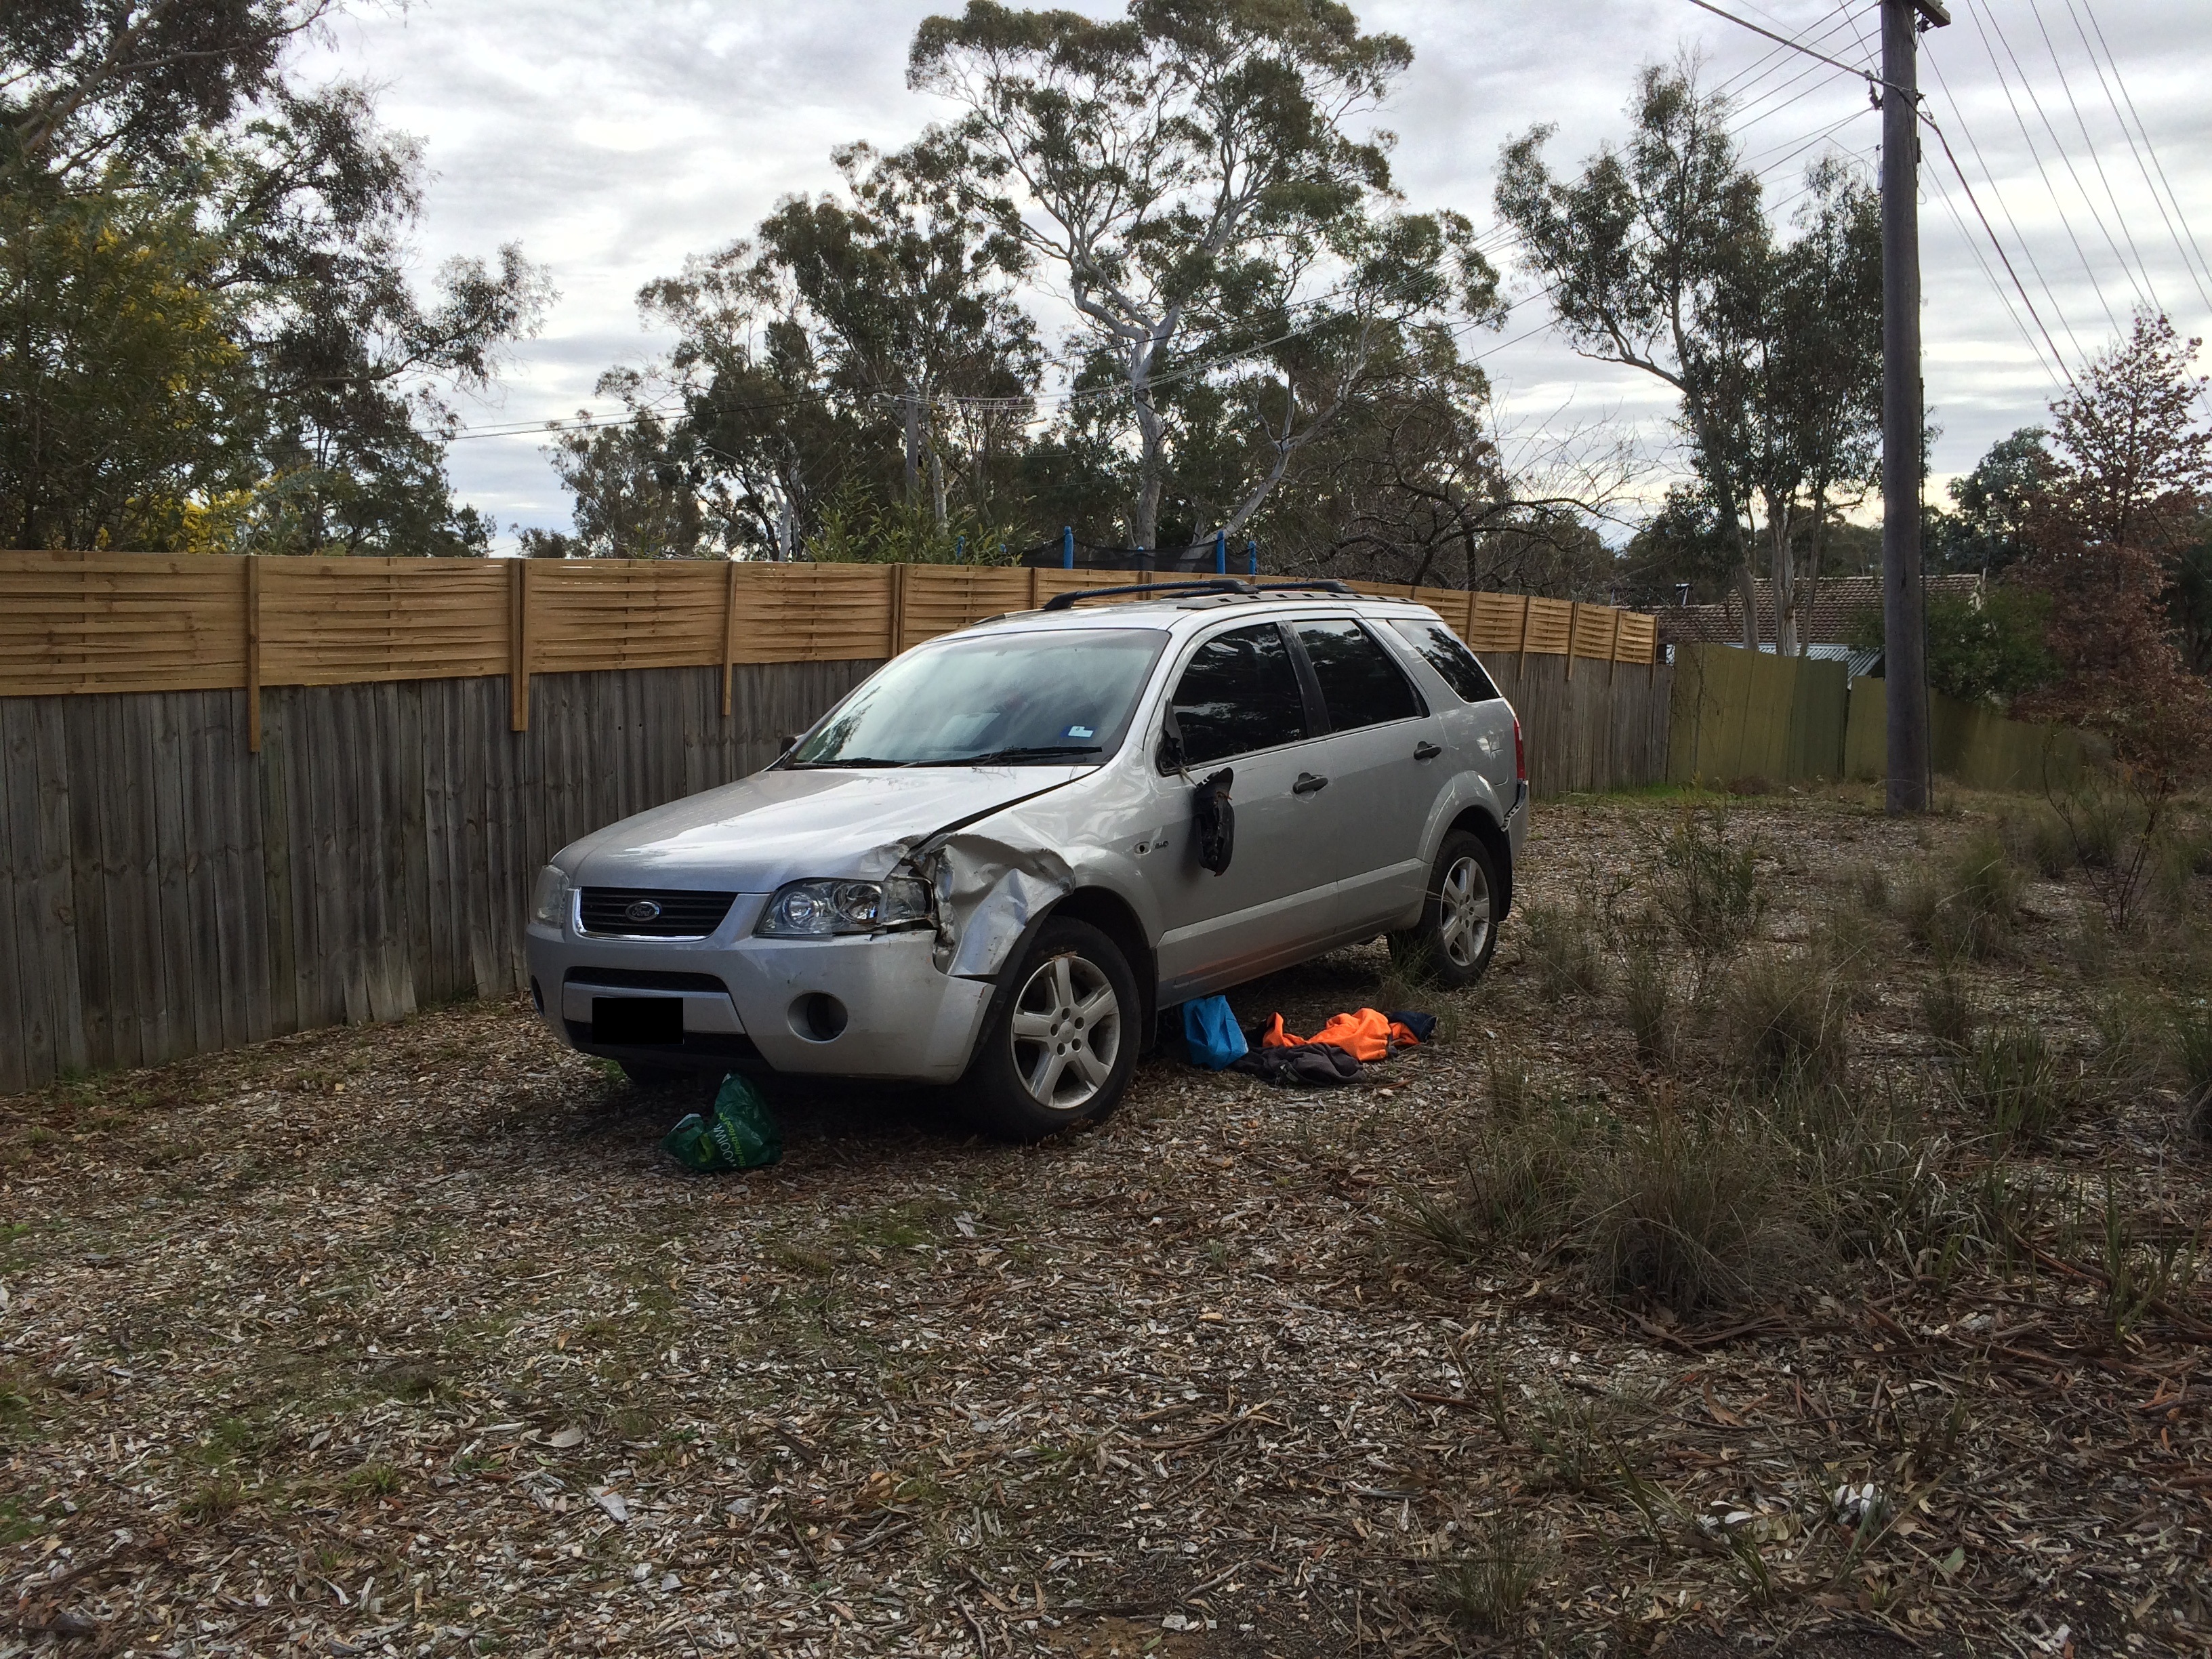 Ford Territory in Aranda which sustained extensive damage and contained items of stolen property